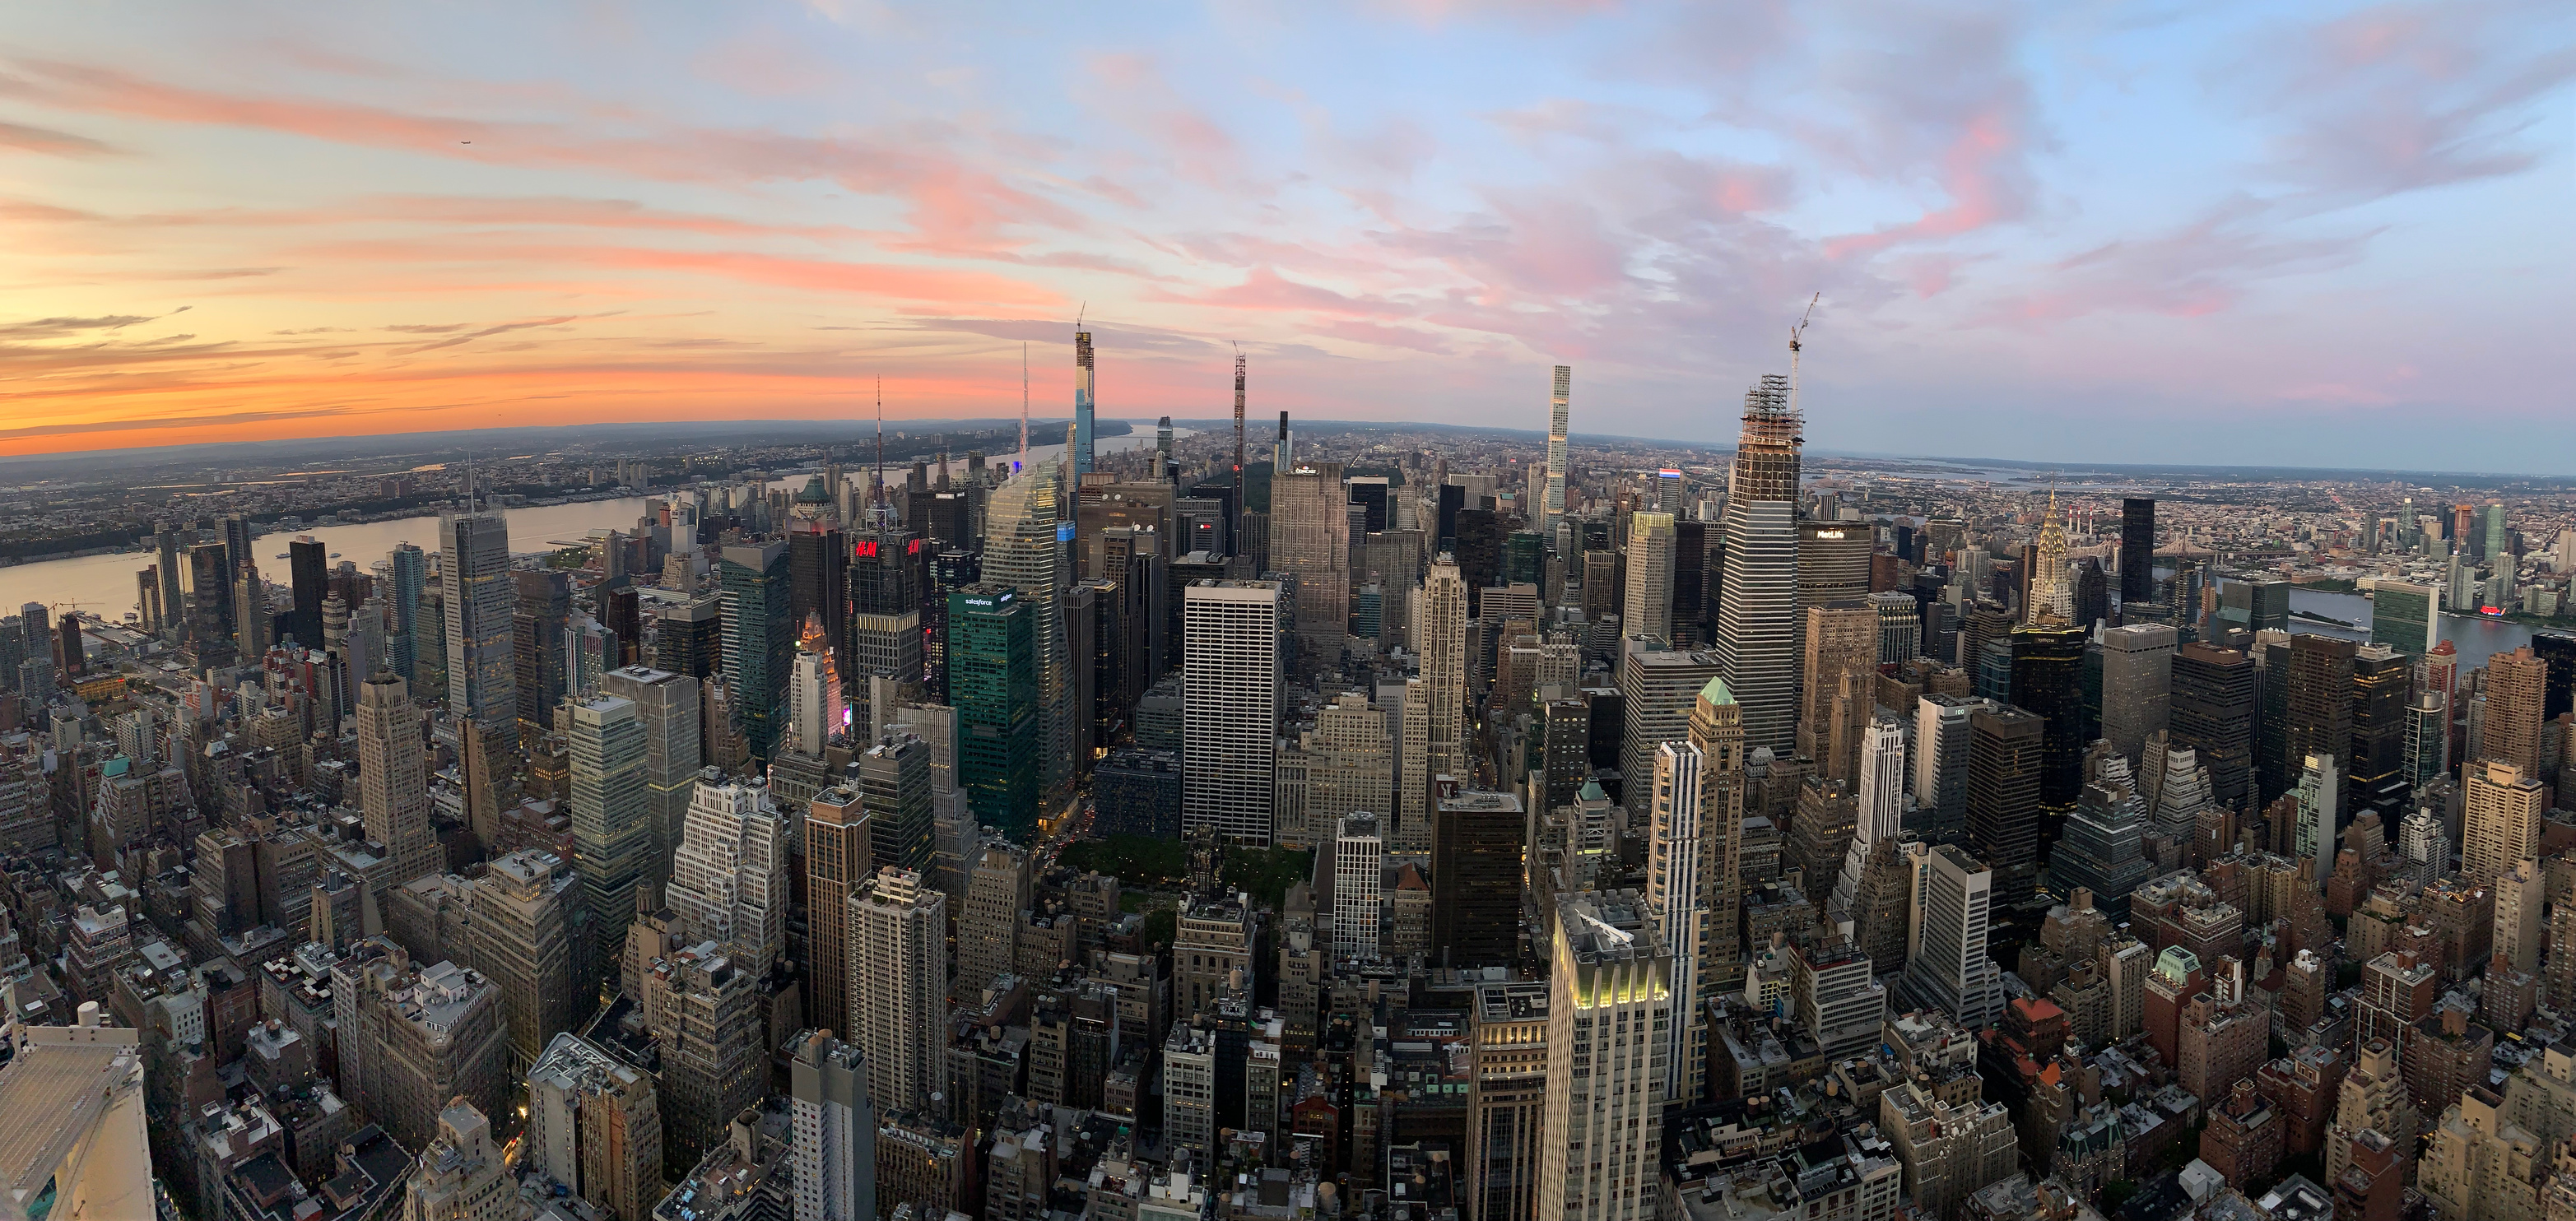 An aerial view of the New York City skyline at sunset. 
Travel Planner 
3Day Trip Plan
Photography